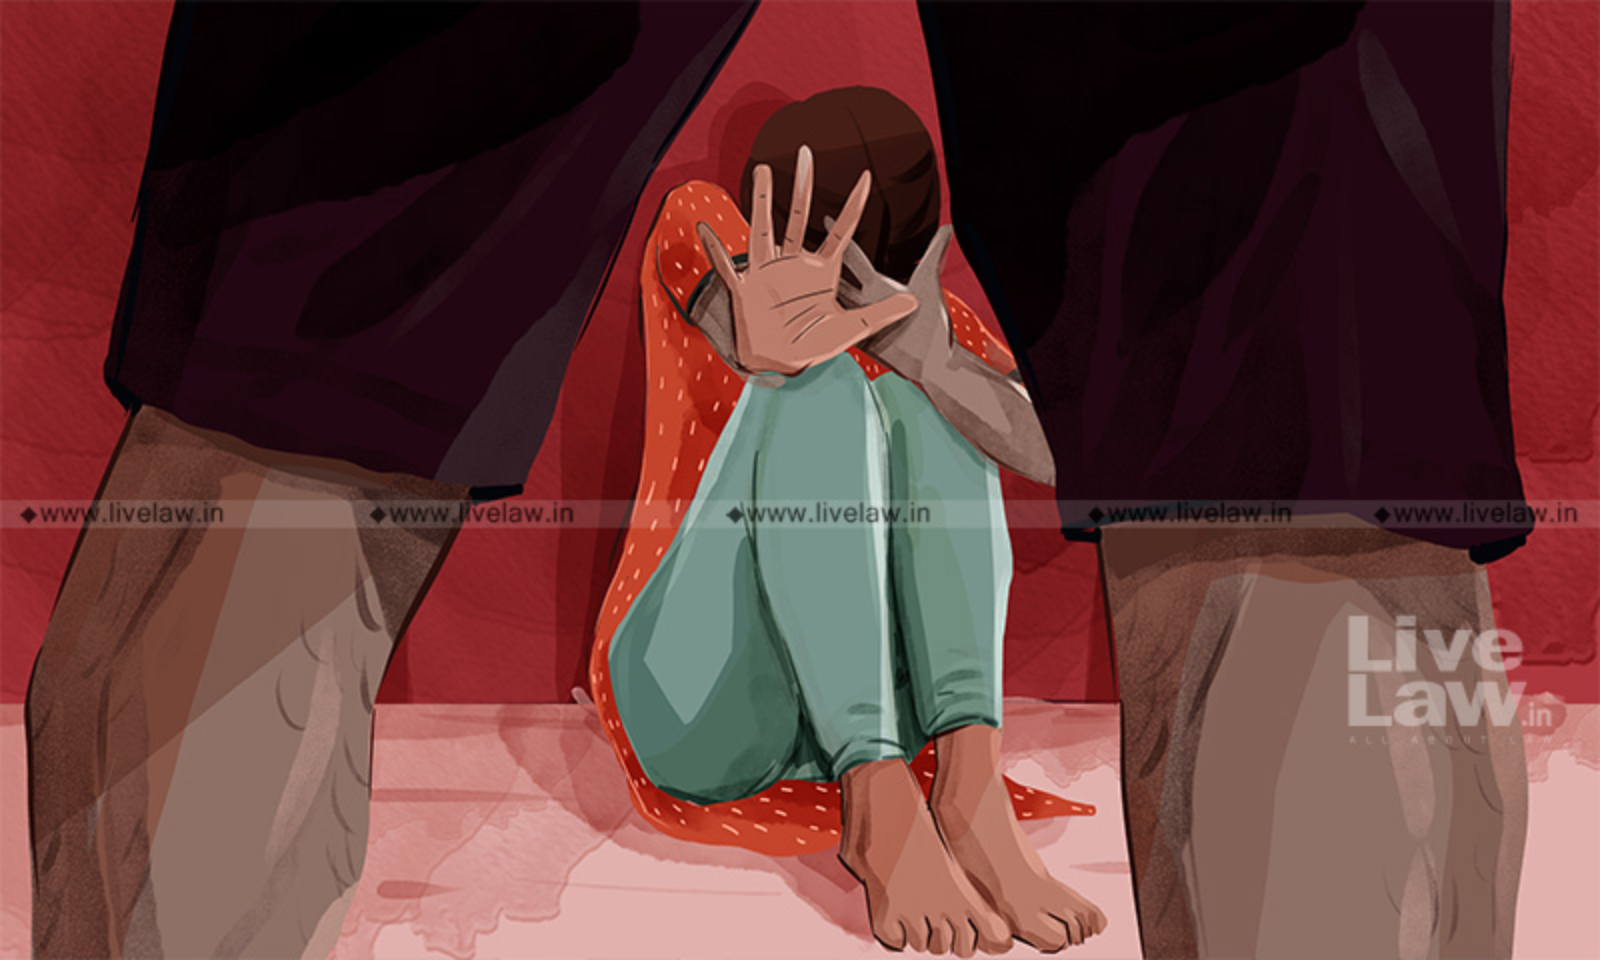 Rajasthani Saxy Xxx Rape Video - Consent, Rape, And Marriage: What Is India Doing?